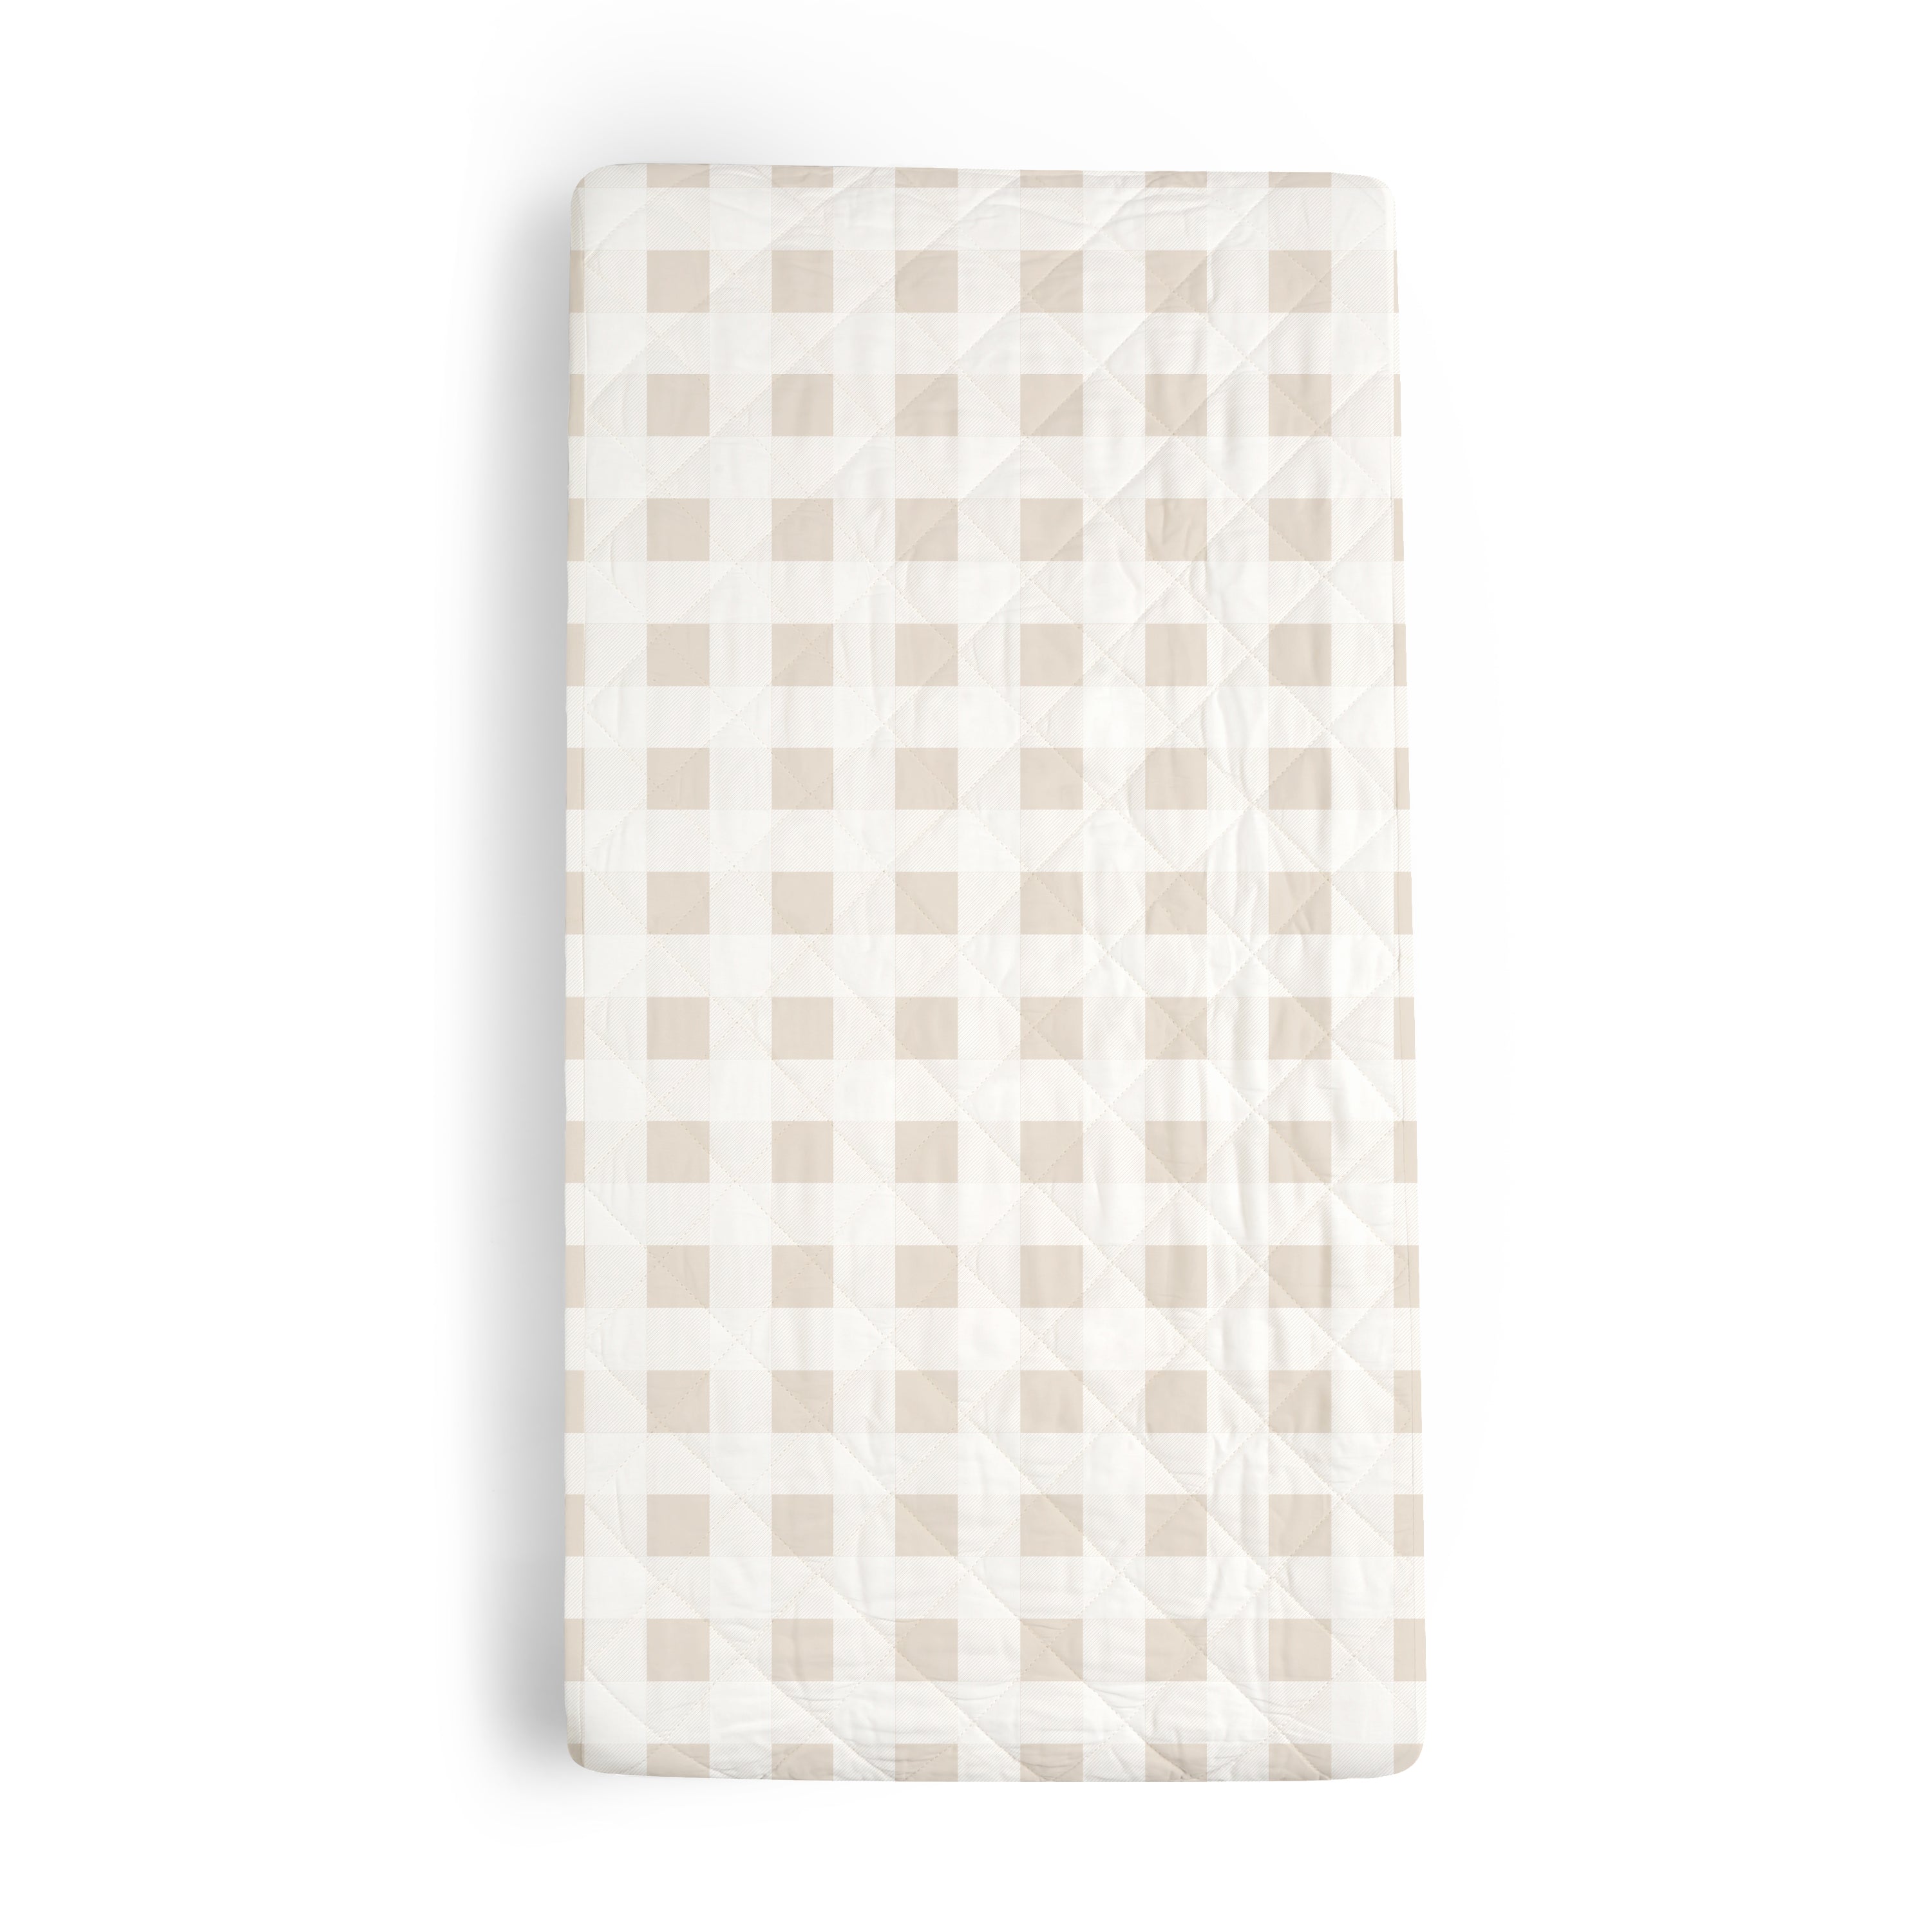 A Makemake Organics Organic Cotton Changing Pad Cover in Plaid, displayed on a white background.